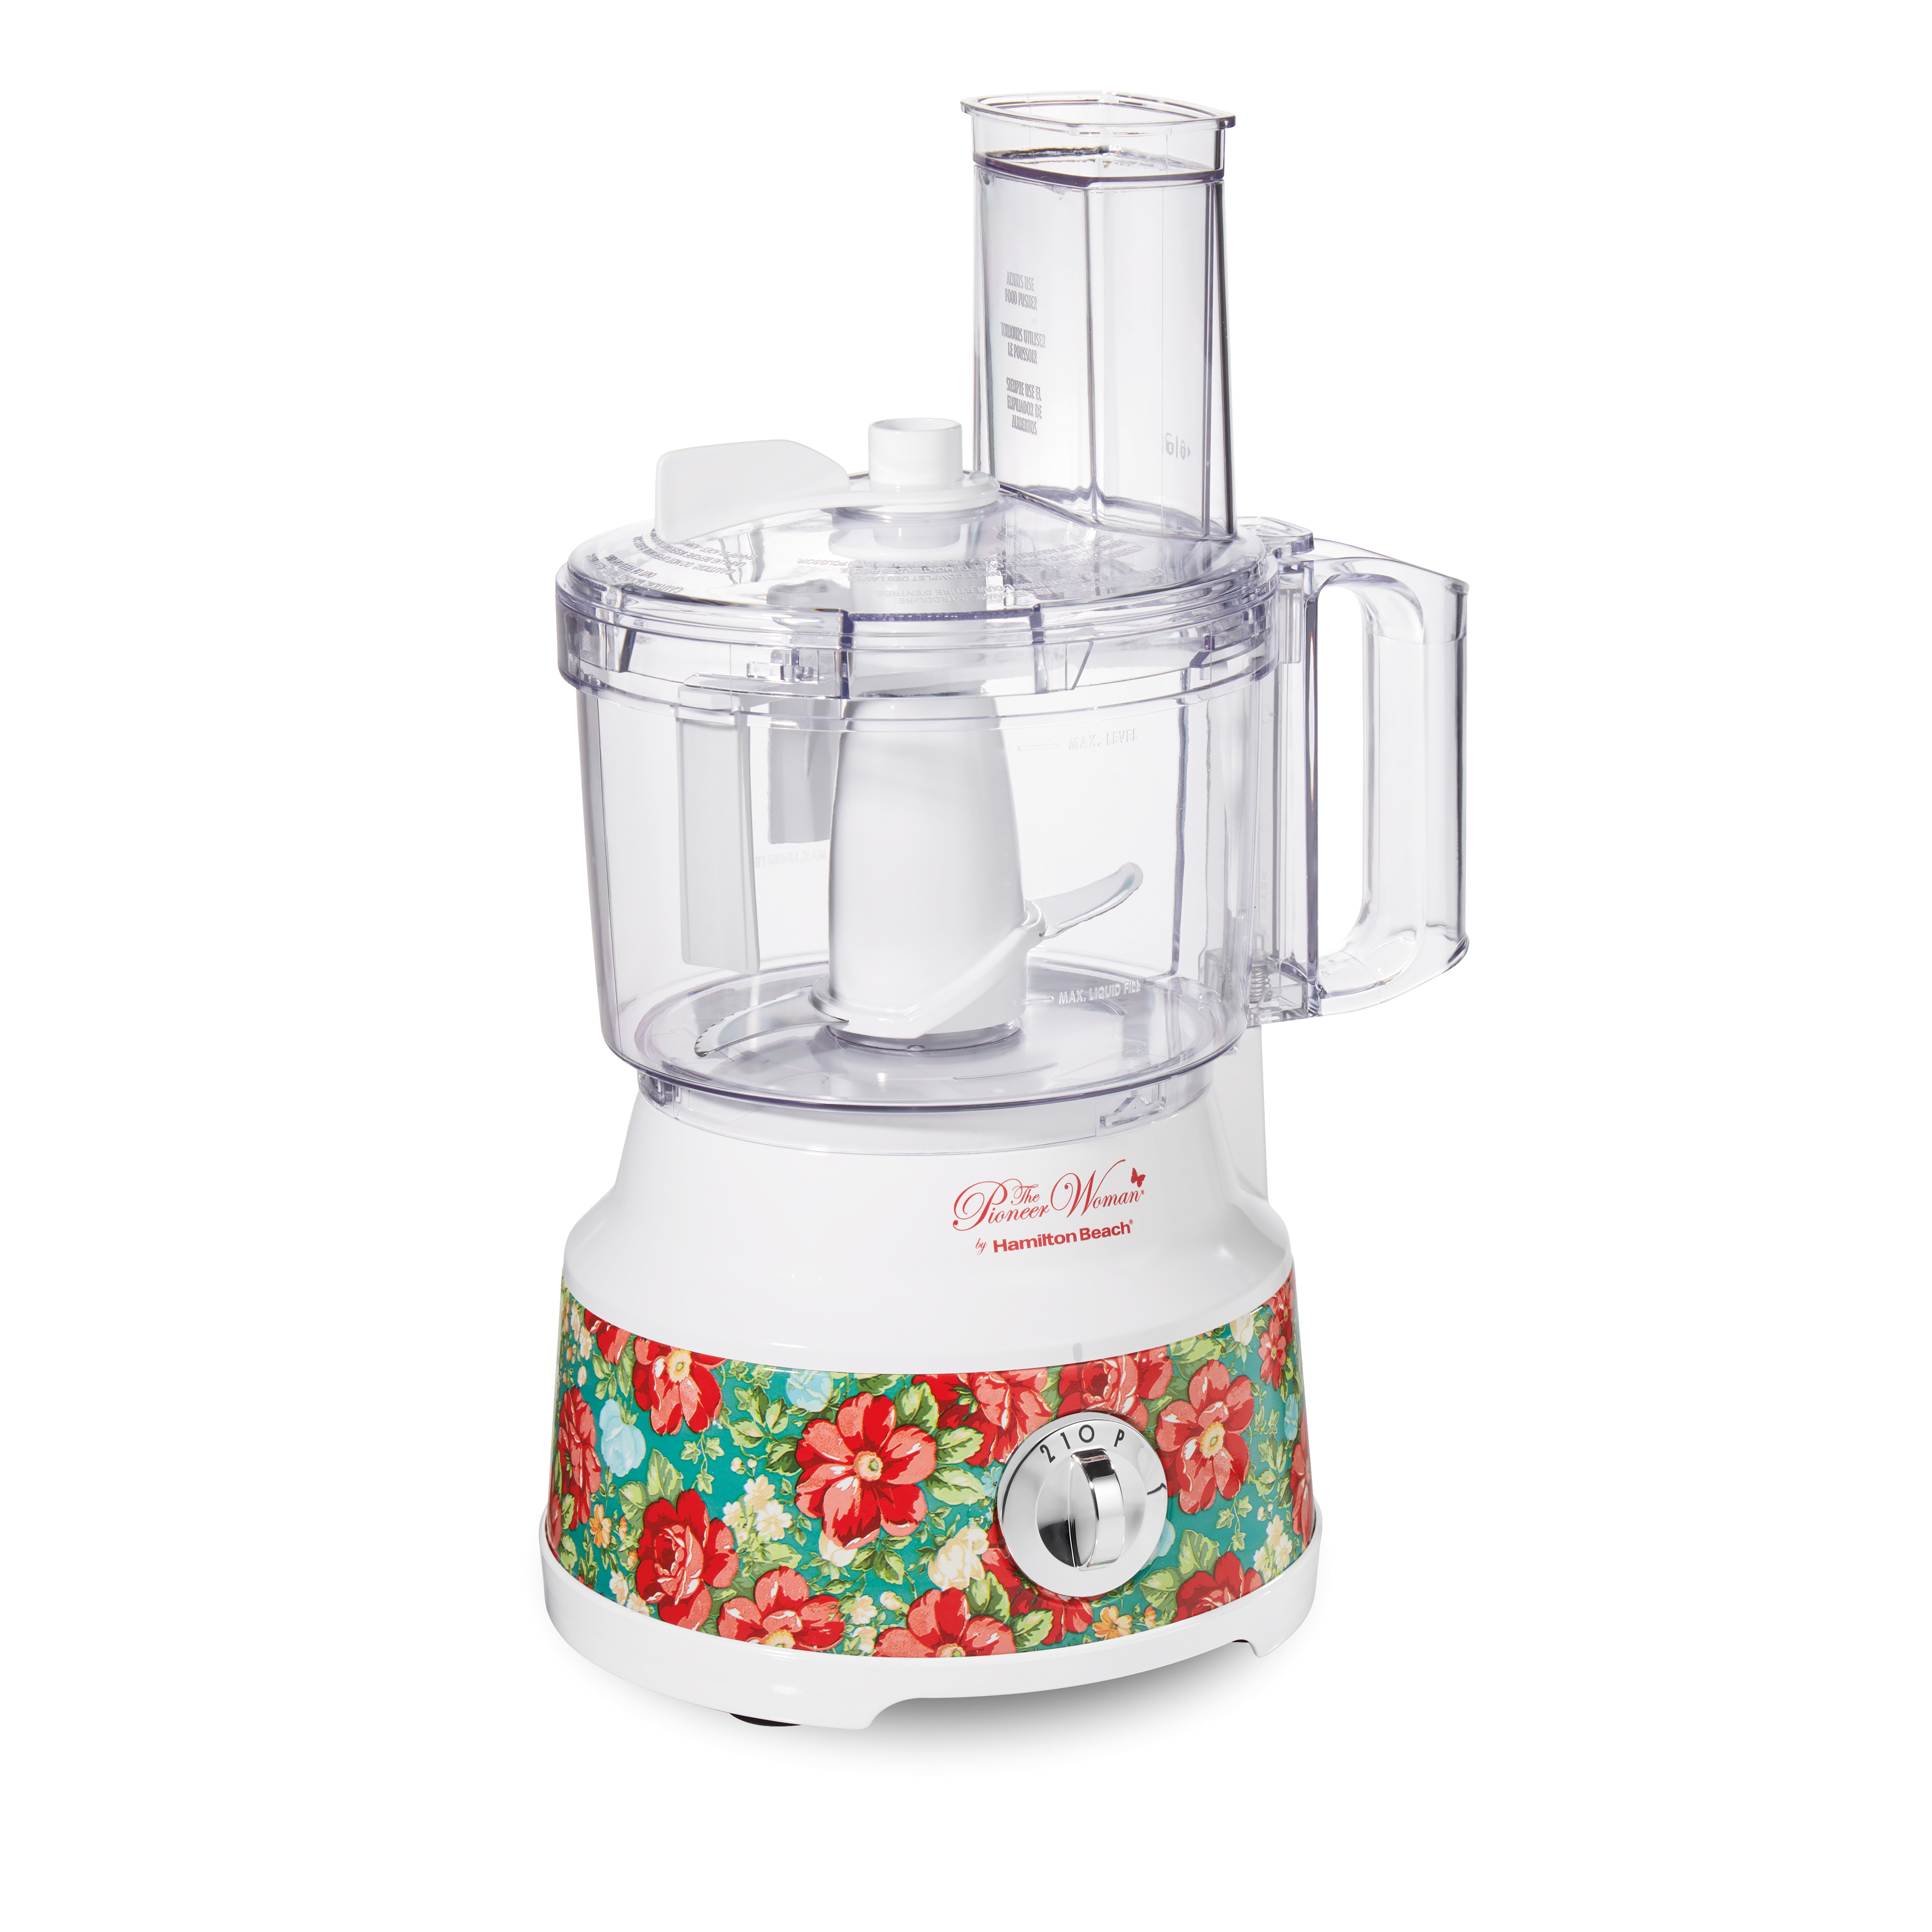 Pioneer Woman Food Processor with Bowl Scraper, 10 Cup, Large Feed Chute, Stainless Steel Blades, Vintage Floral, 70731 - image 1 of 7